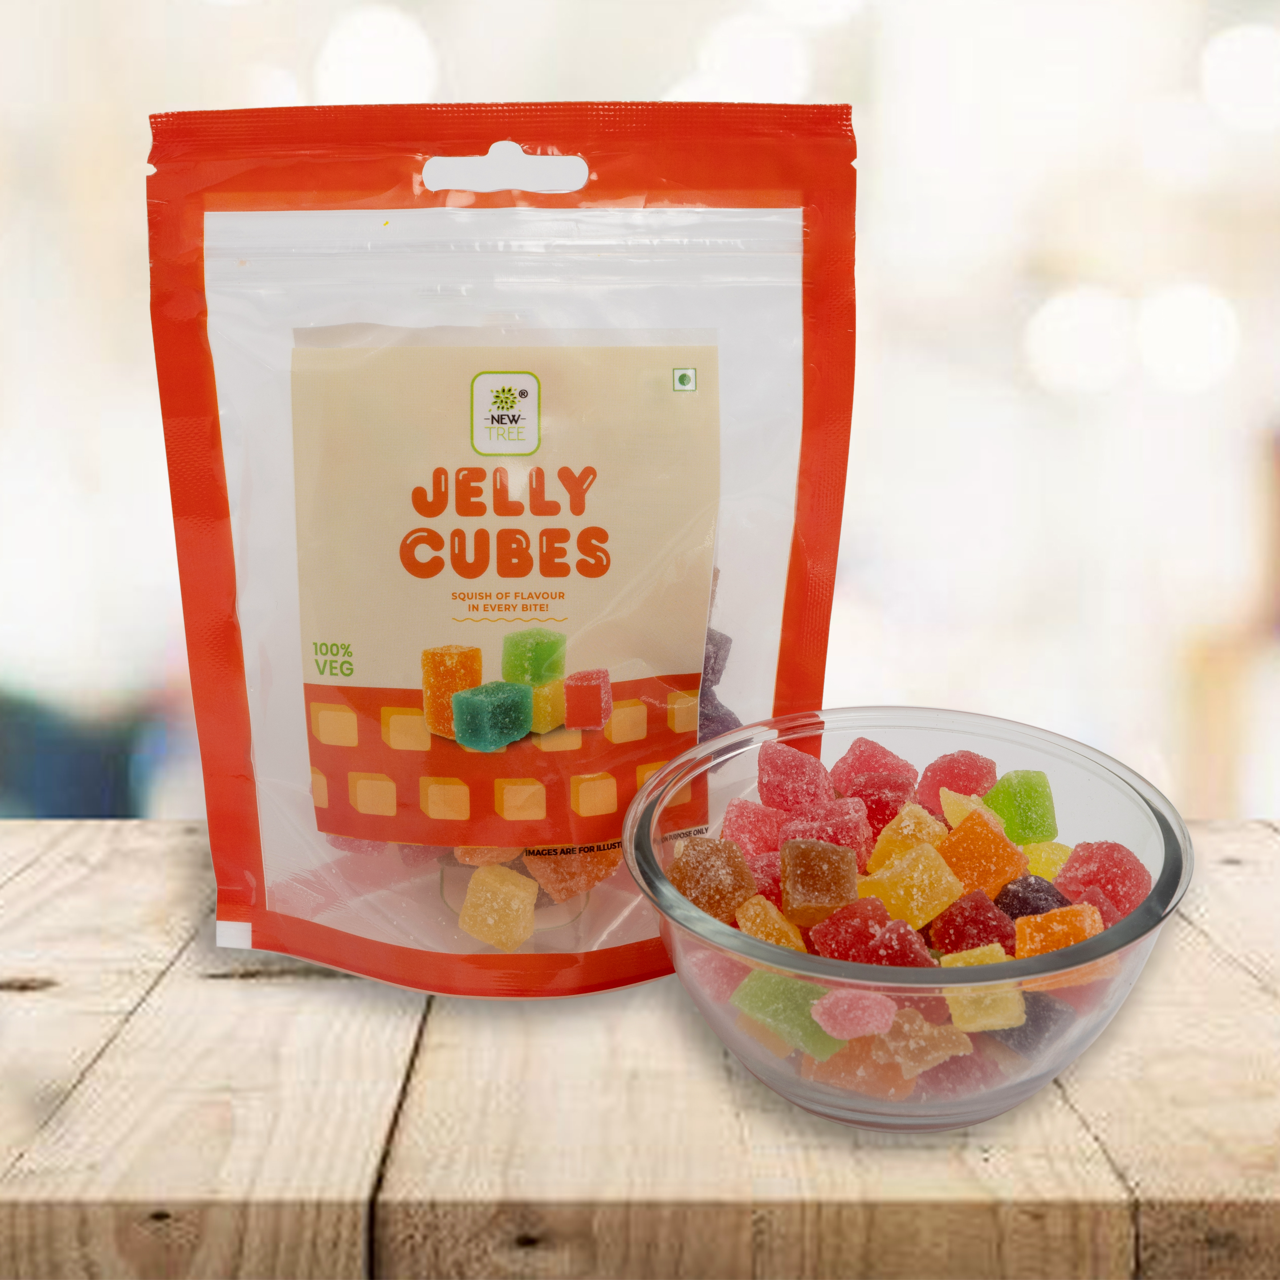 Jelly Cubes Pouch